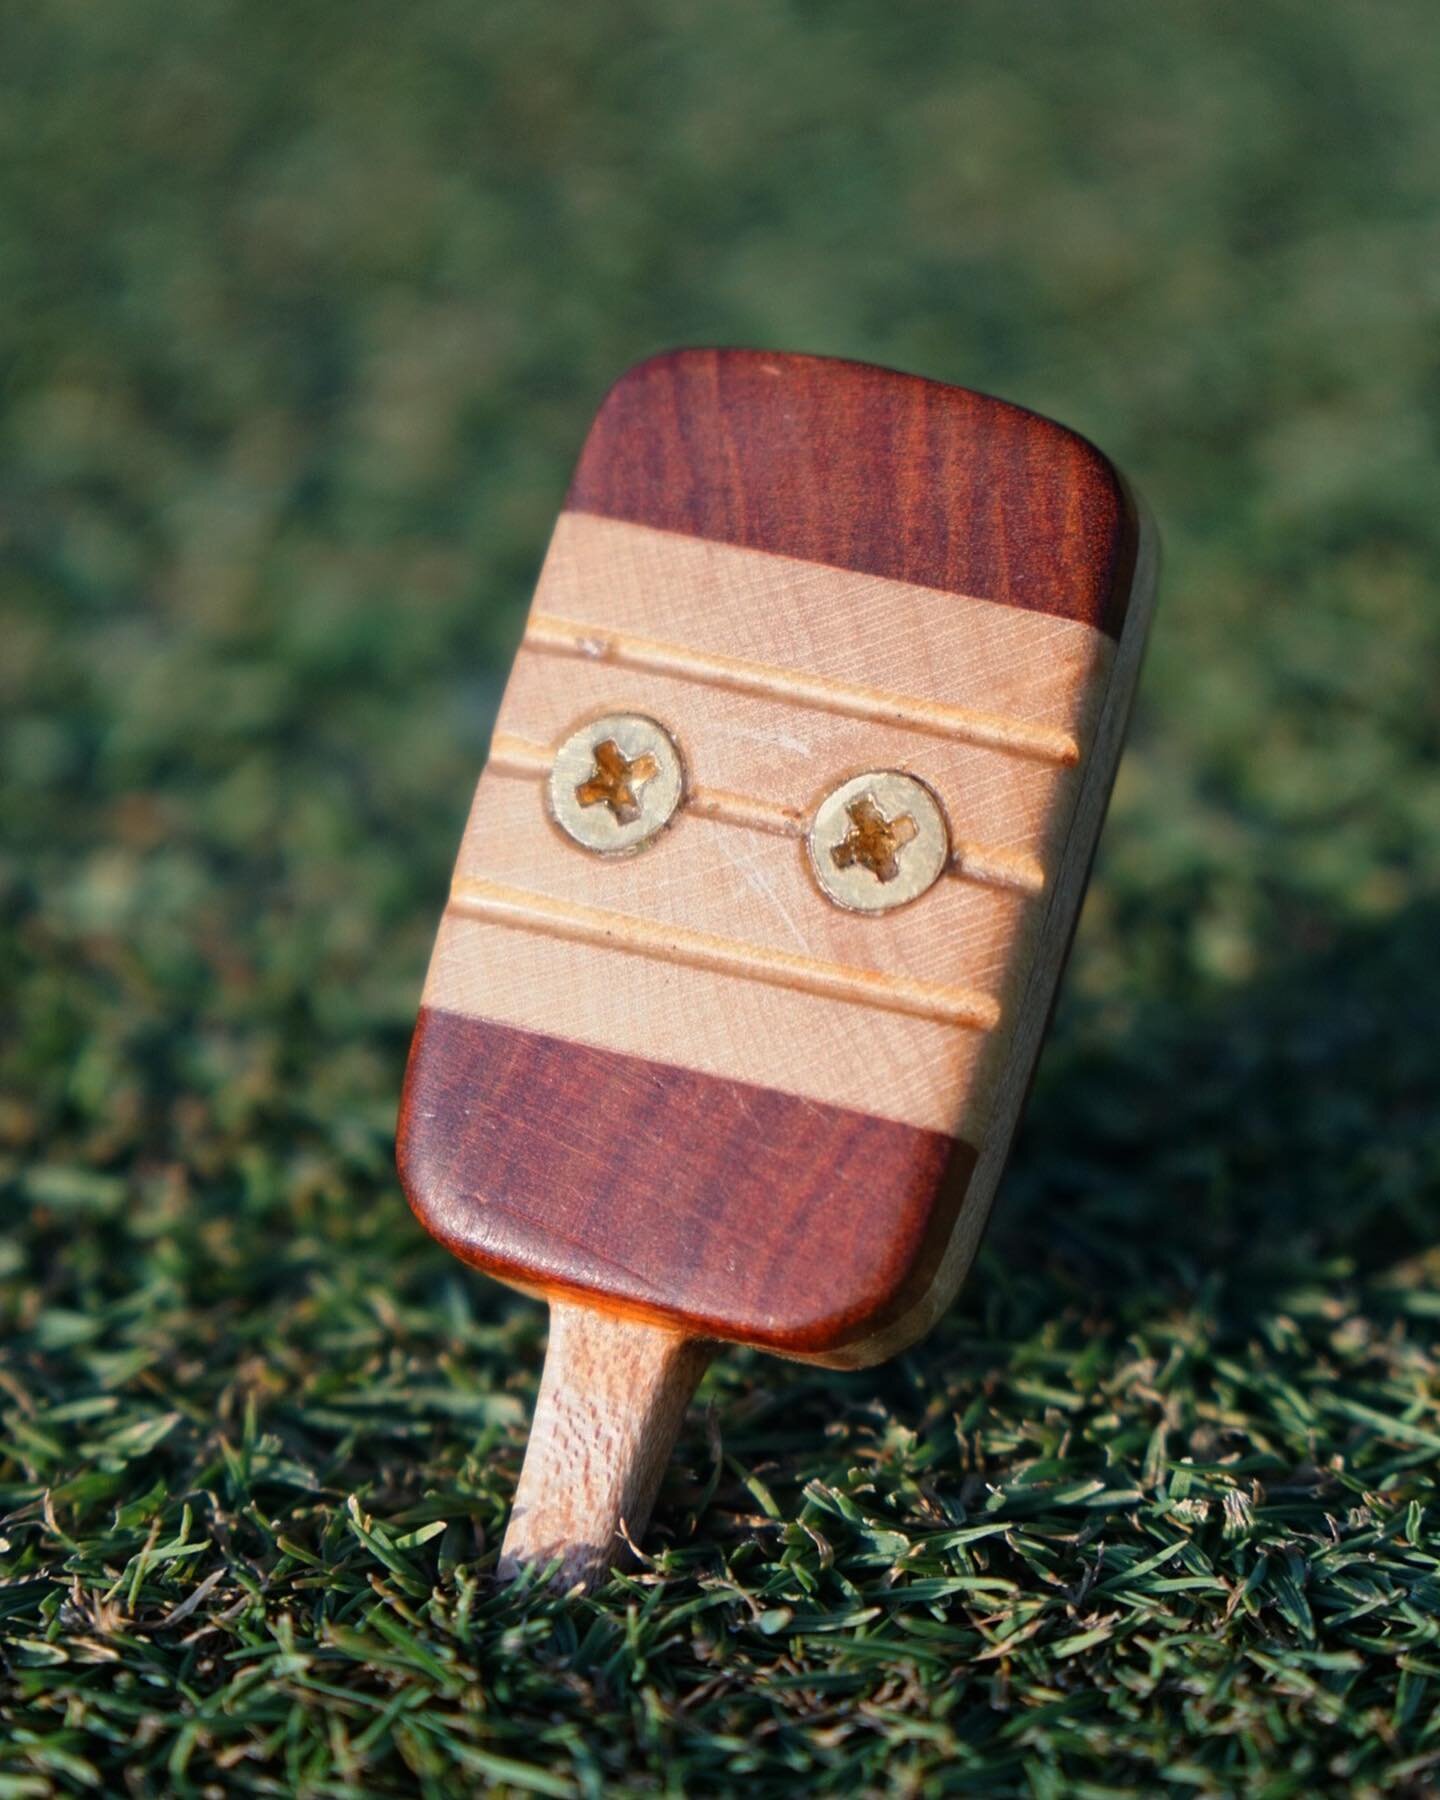 With golf season around the corner, have you considered how you&rsquo;ll be fixing your porch marks this year?  #persimmontool #persimmonmarker #handmade #golftools #ballmarker #repairyourpitchmarks